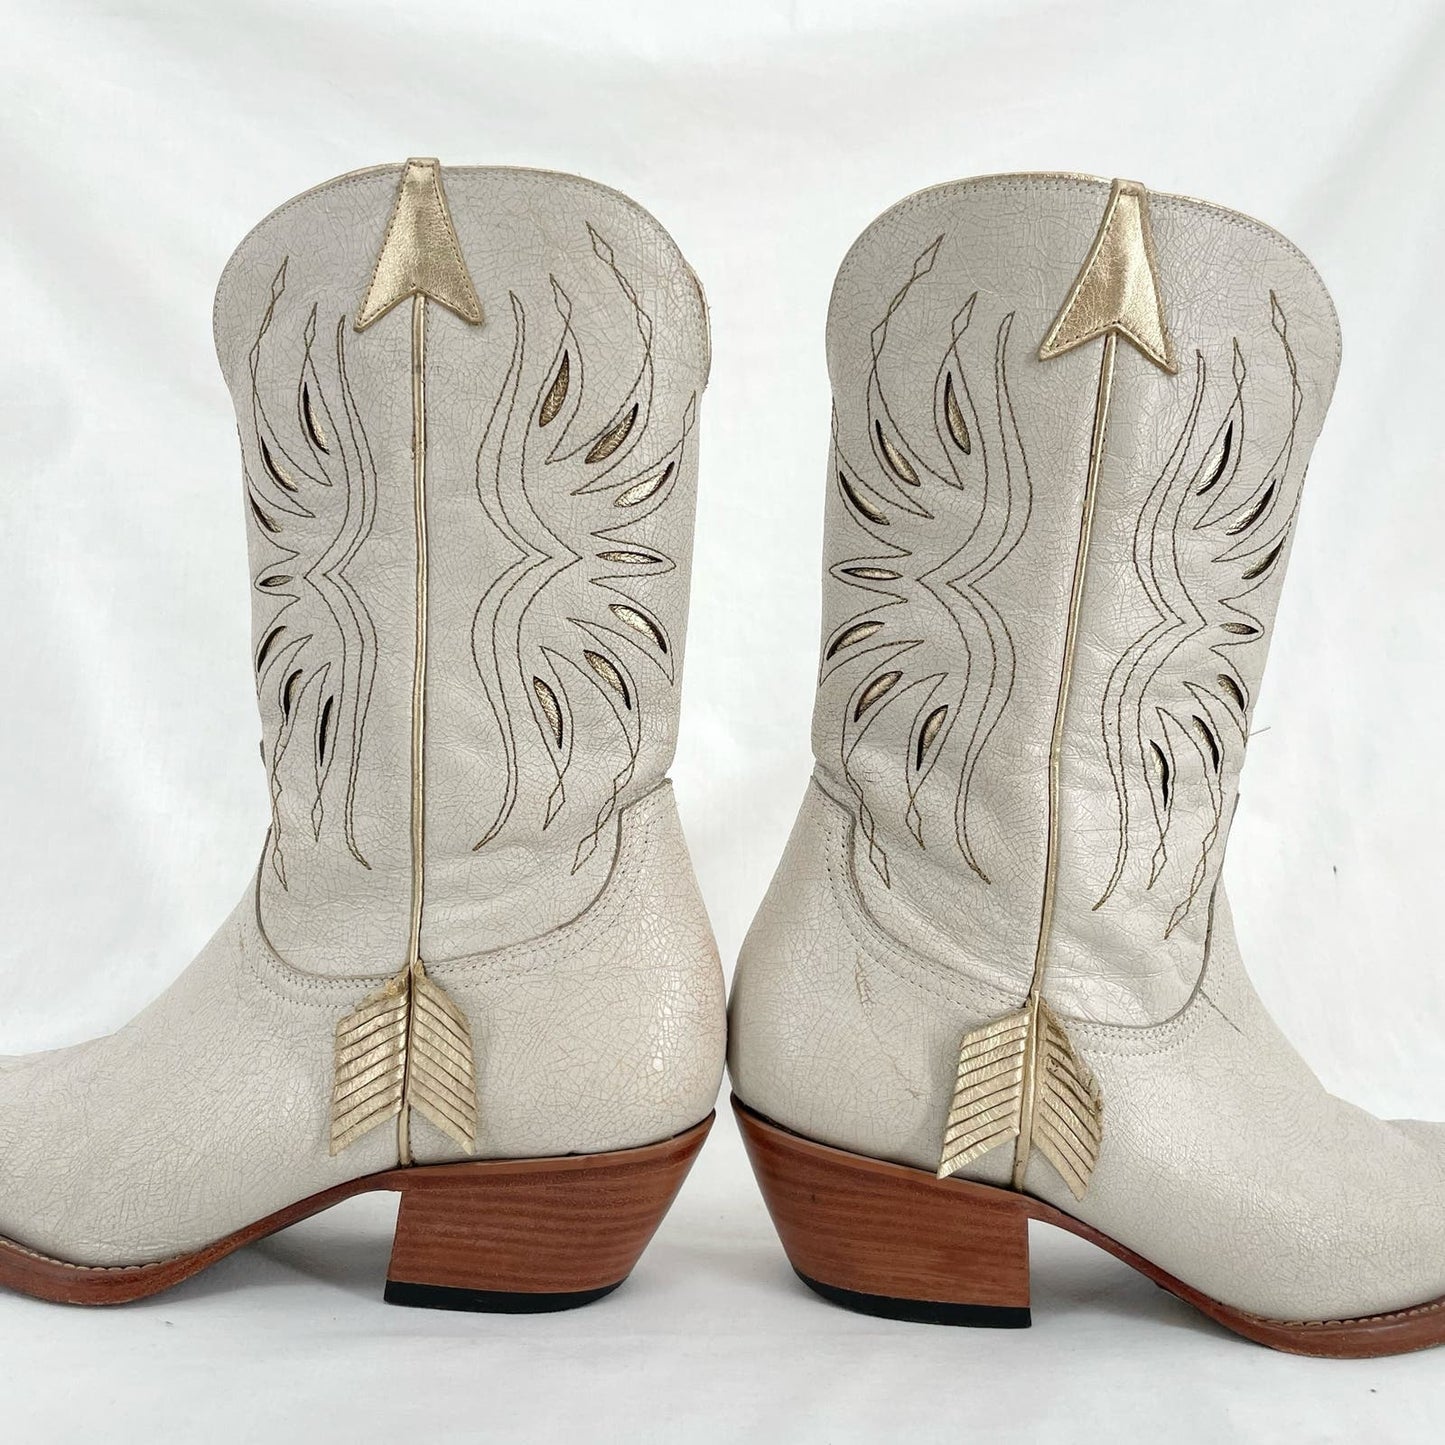 Lucchese x Kacey Musgraves Golden Arrow White Leather Cowboy Boots RARE Size 9.5